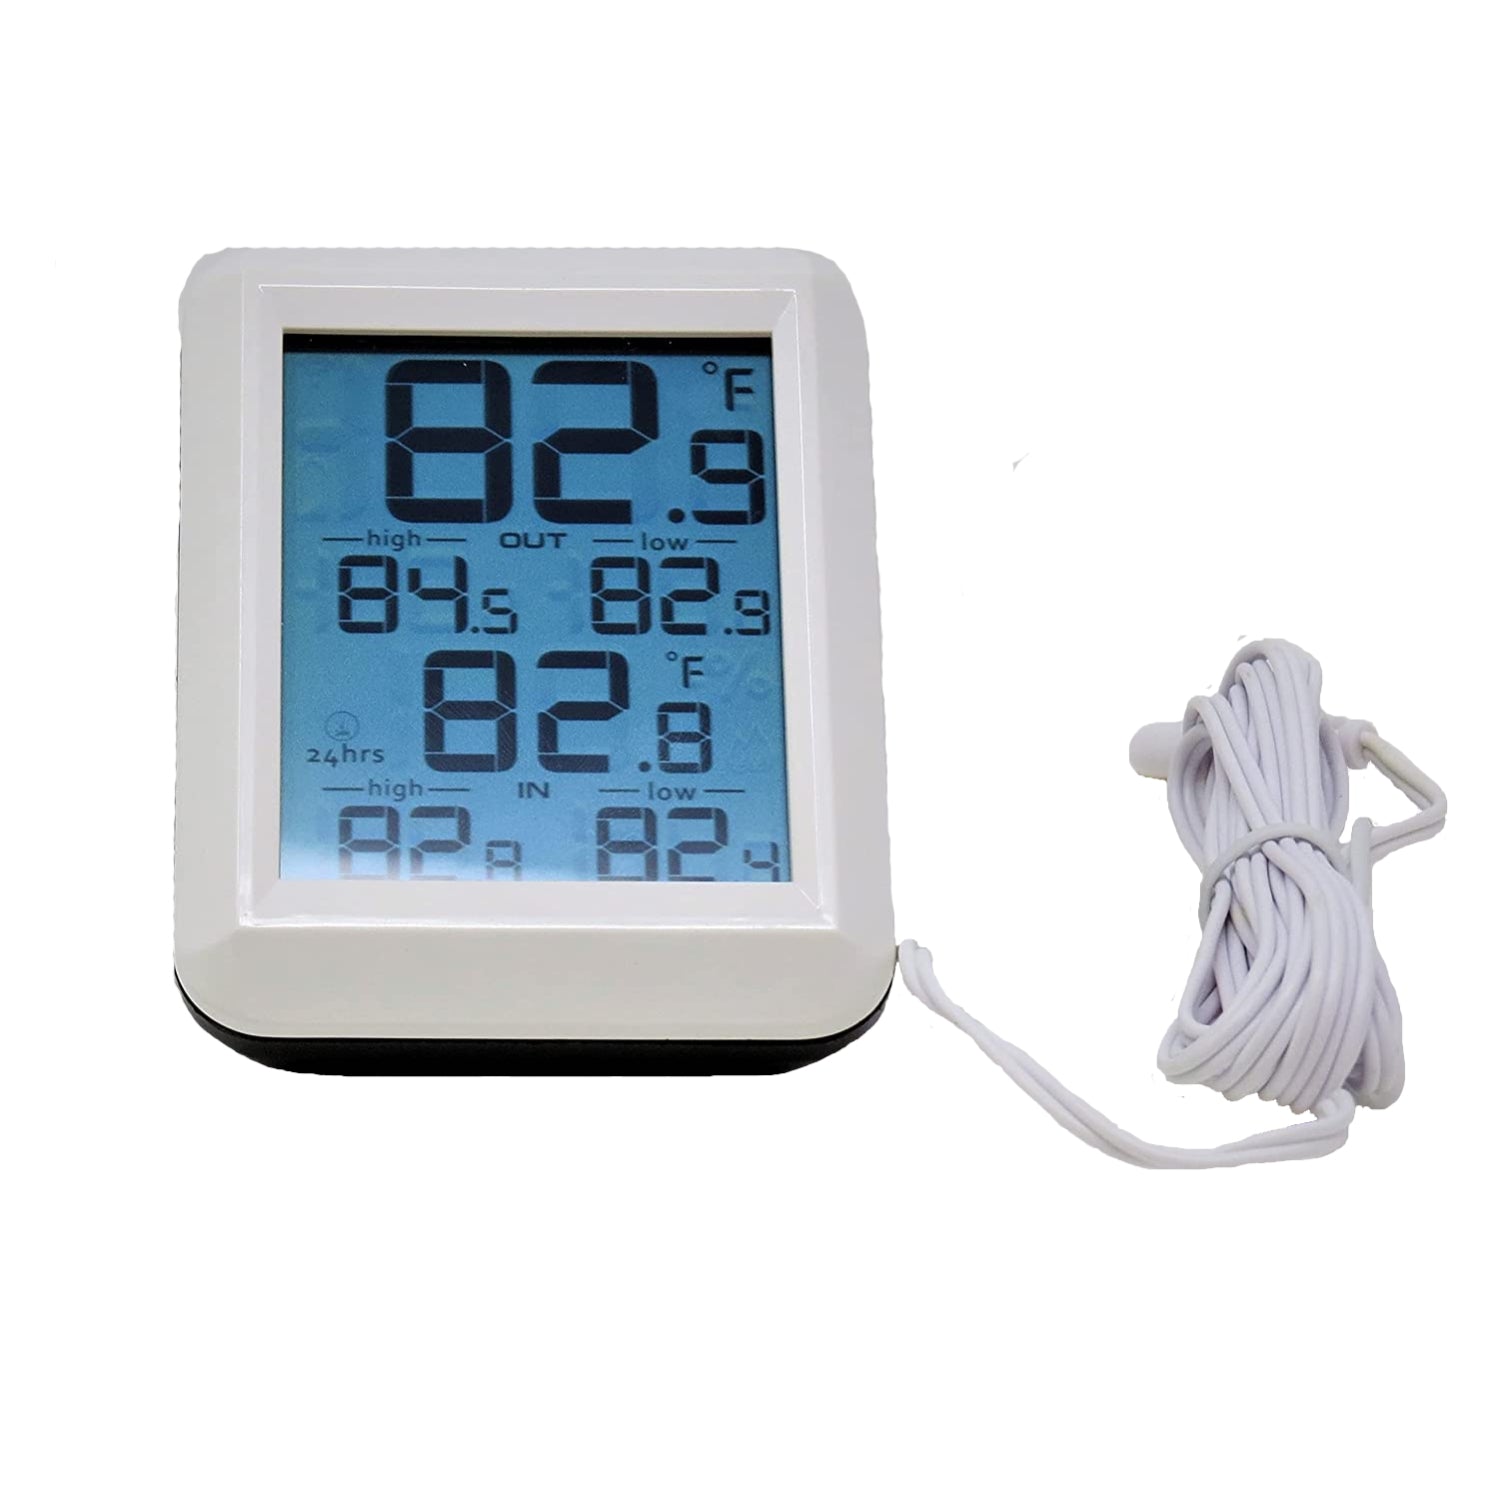 Amastar A0422 Indoor Thermometer Portable Digital Temperature Monitor –  Kaito Electronic Inc